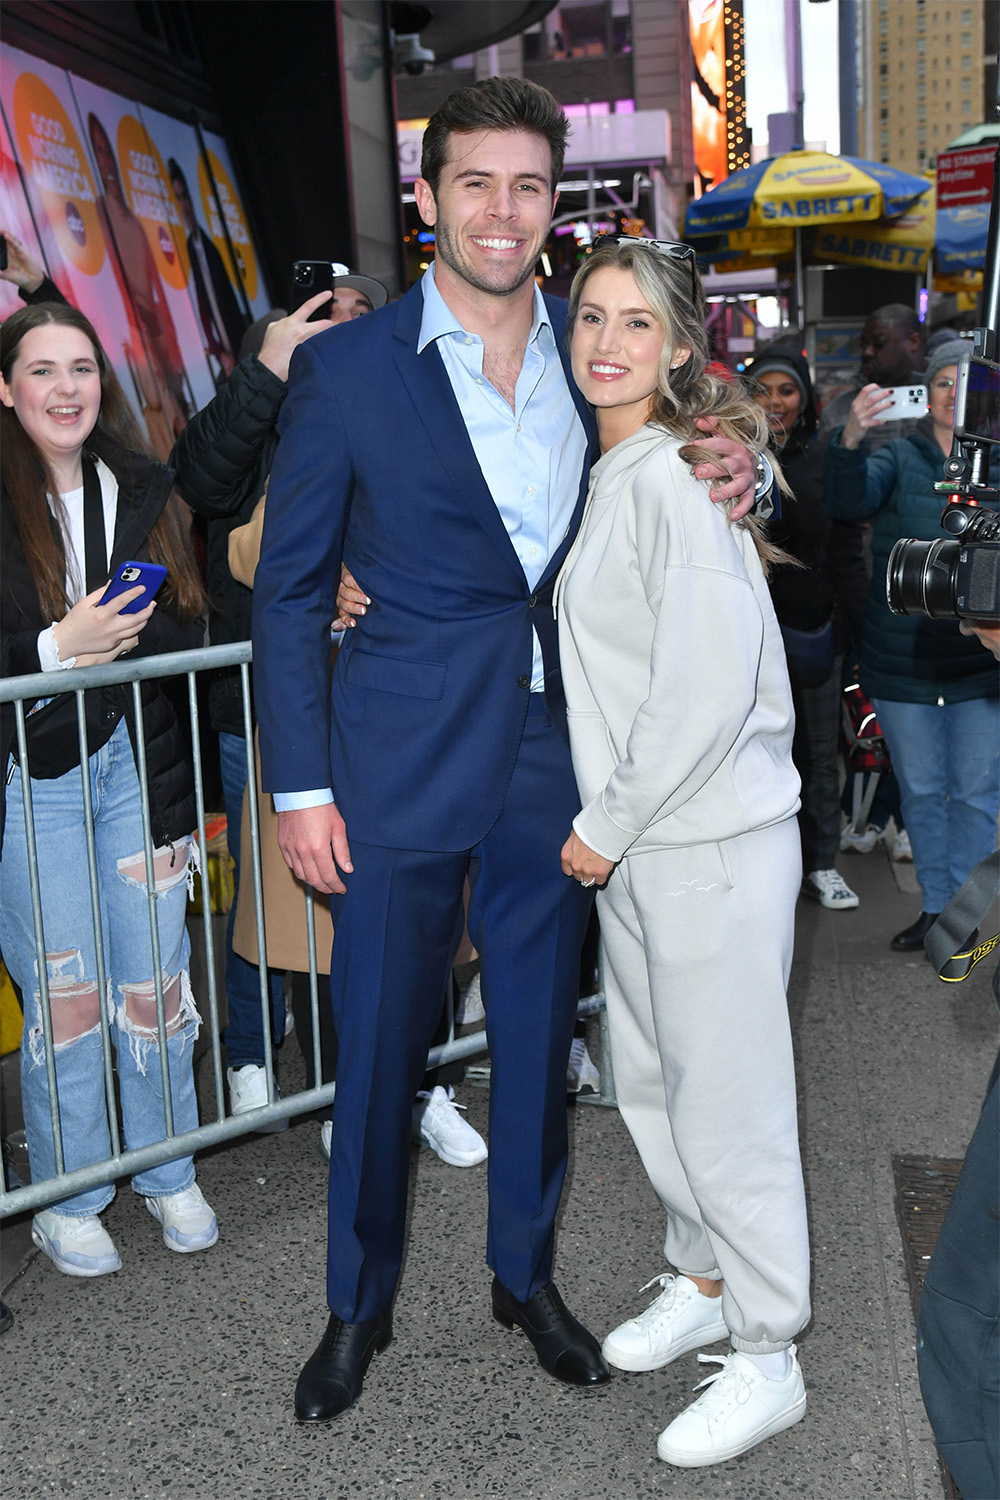 Zach Shallcross Reveals He Couldn't Get Fiancee Kaity Biggar Her Ideal Engagement Ring Because of Tino Franco